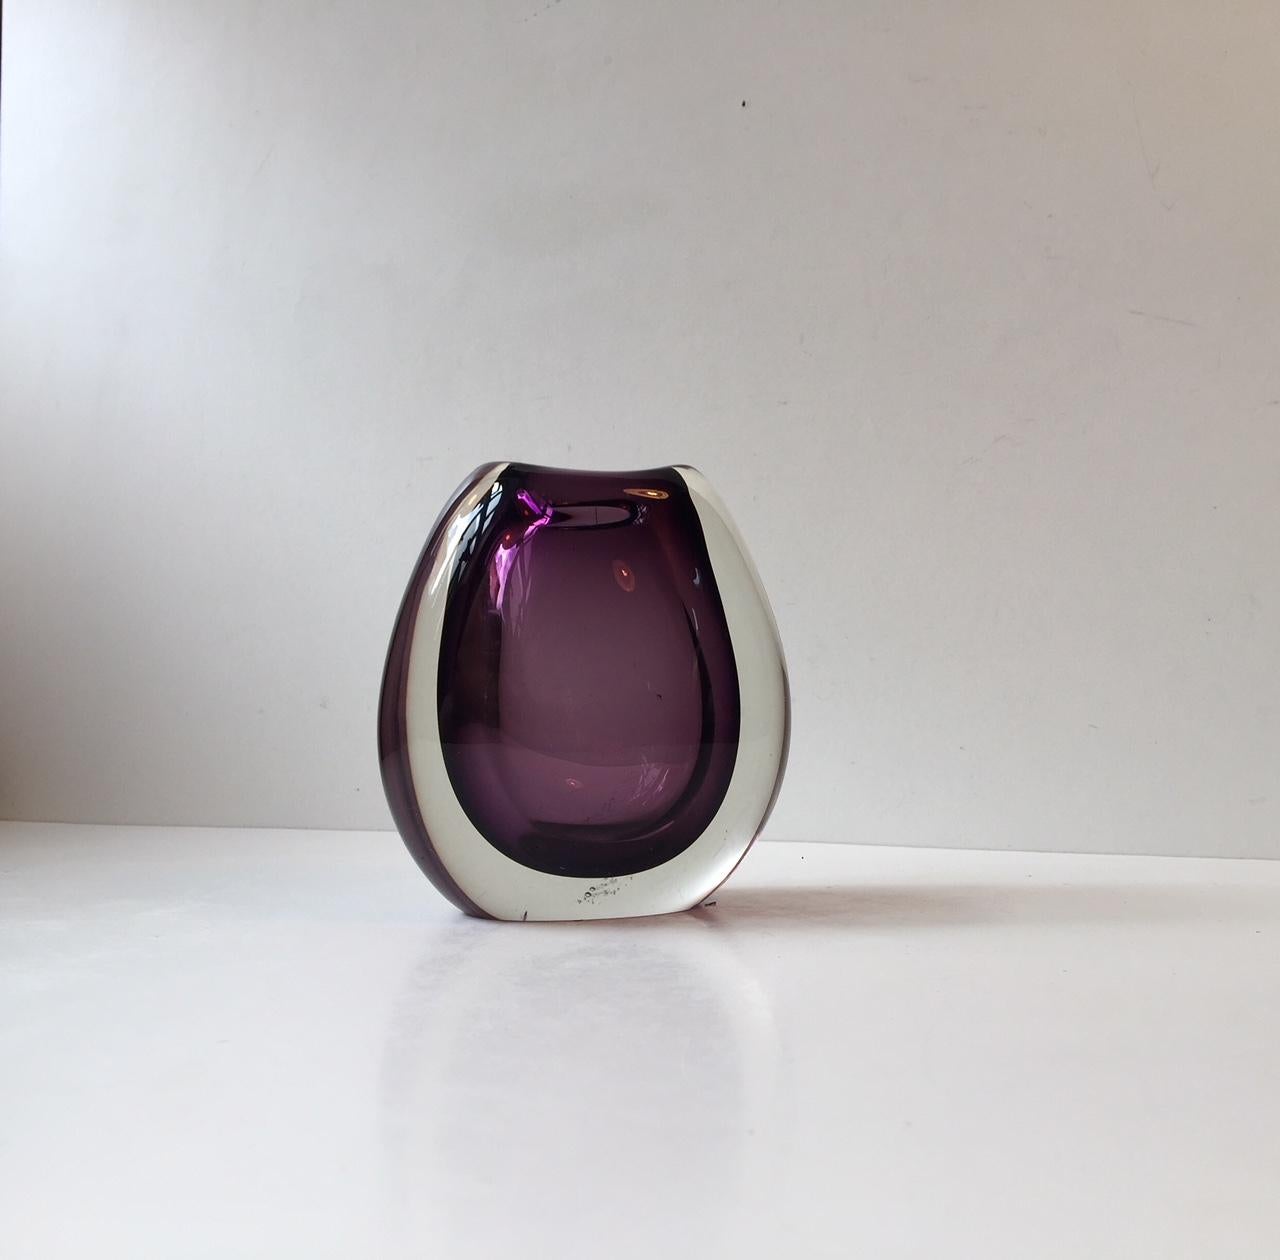 Sommerso art glass vase with a Ametyst purple hue. Designed by Per Lütken and manufactured by Holmegaard in Denmark. This is a rare vase and it was only made in 1955. It is signed by the artist to the base.